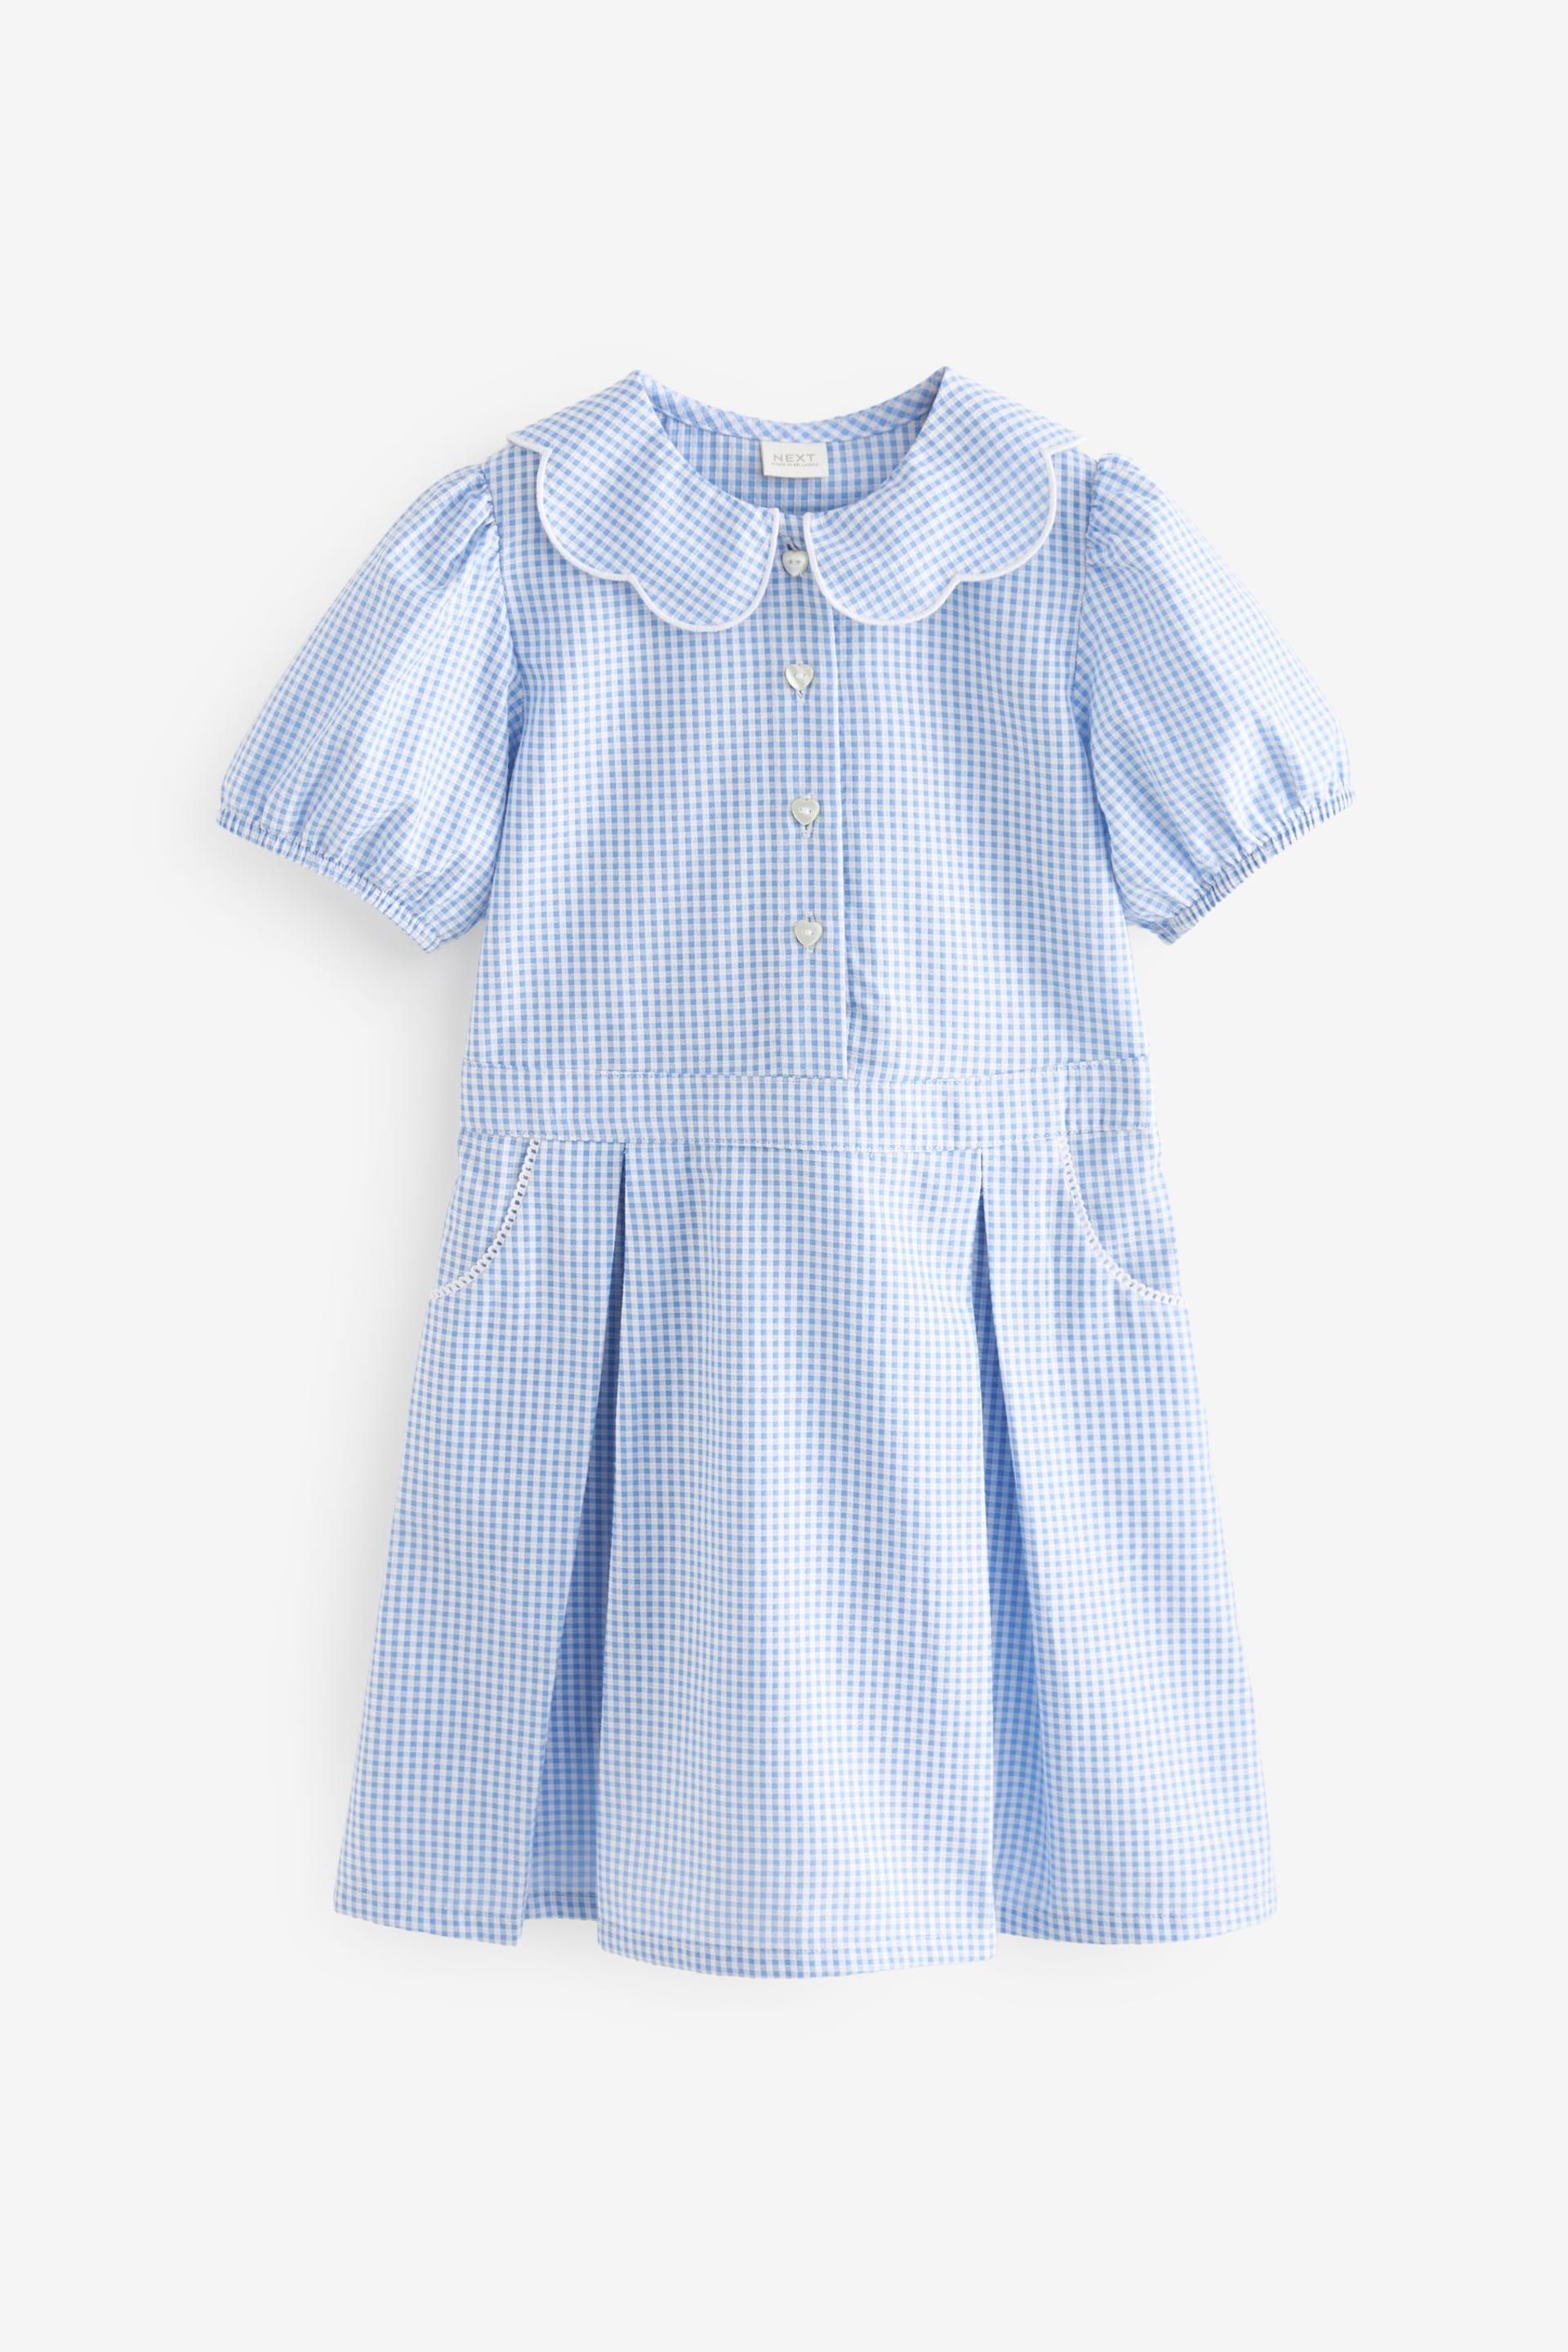 Blue Cotton Rich Scalloped Collar Gingham School Dress (3-14yrs) - Image 5 of 8